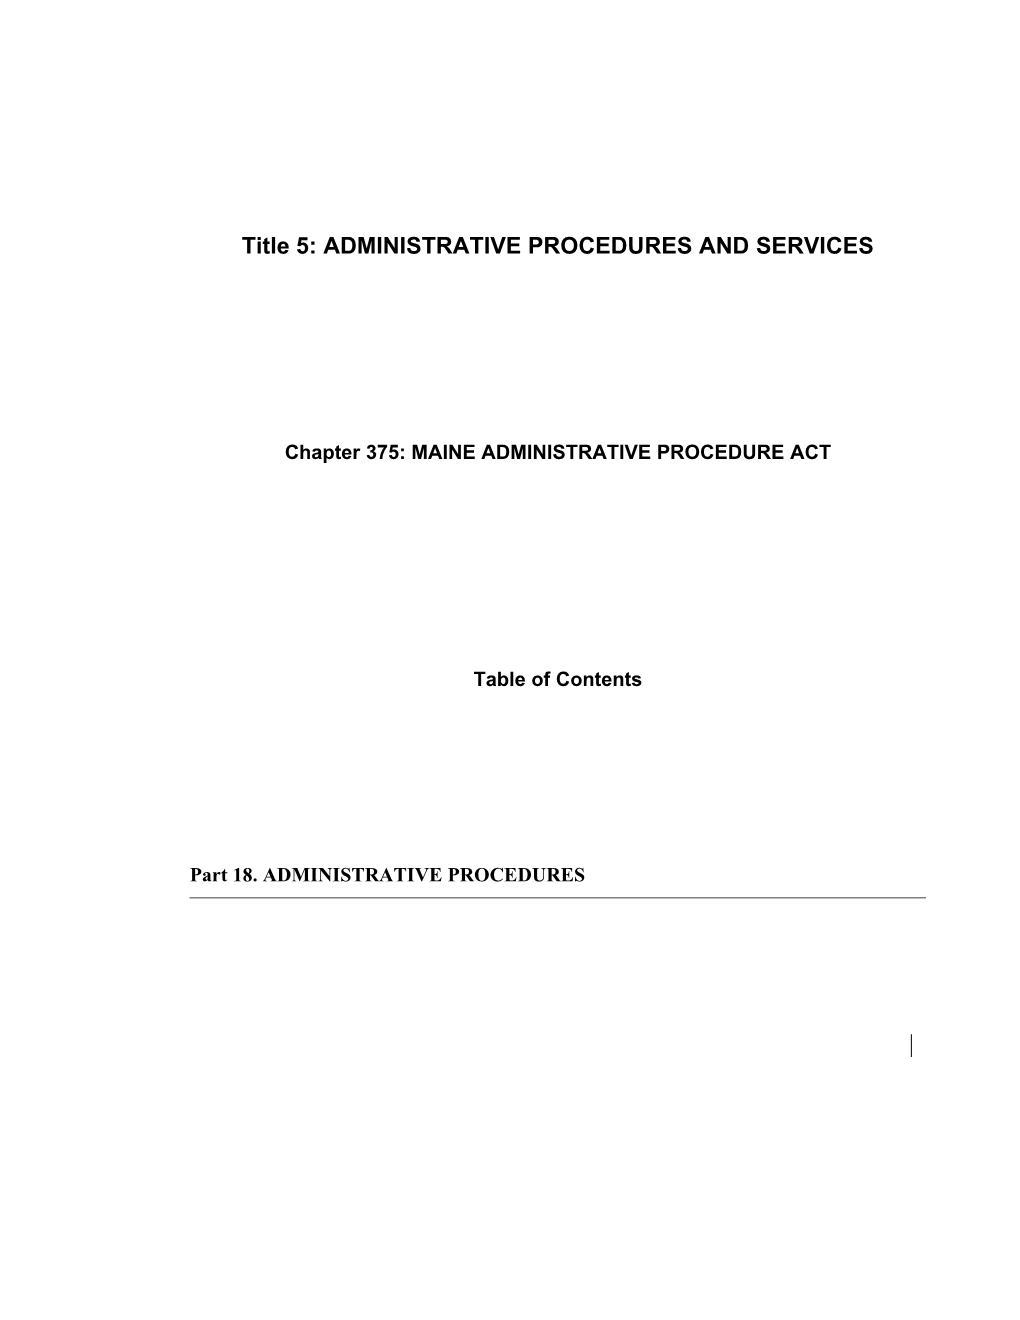 MRS Title 5, Chapter375: MAINE ADMINISTRATIVE PROCEDURE ACT